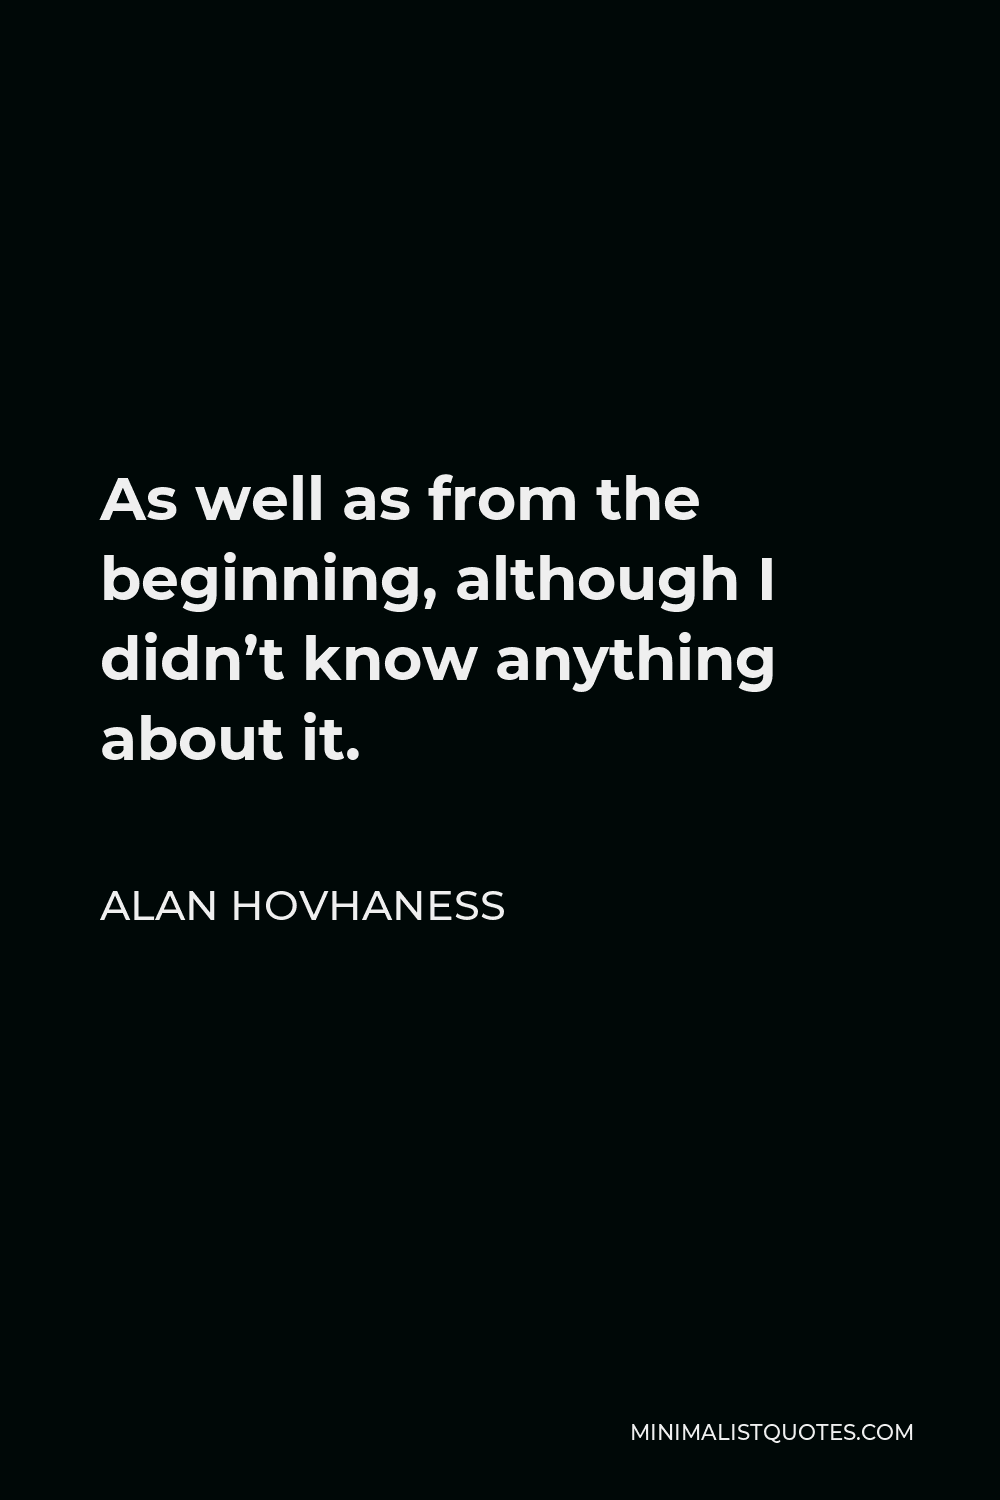 Alan Hovhaness Quote - As well as from the beginning, although I didn’t know anything about it.